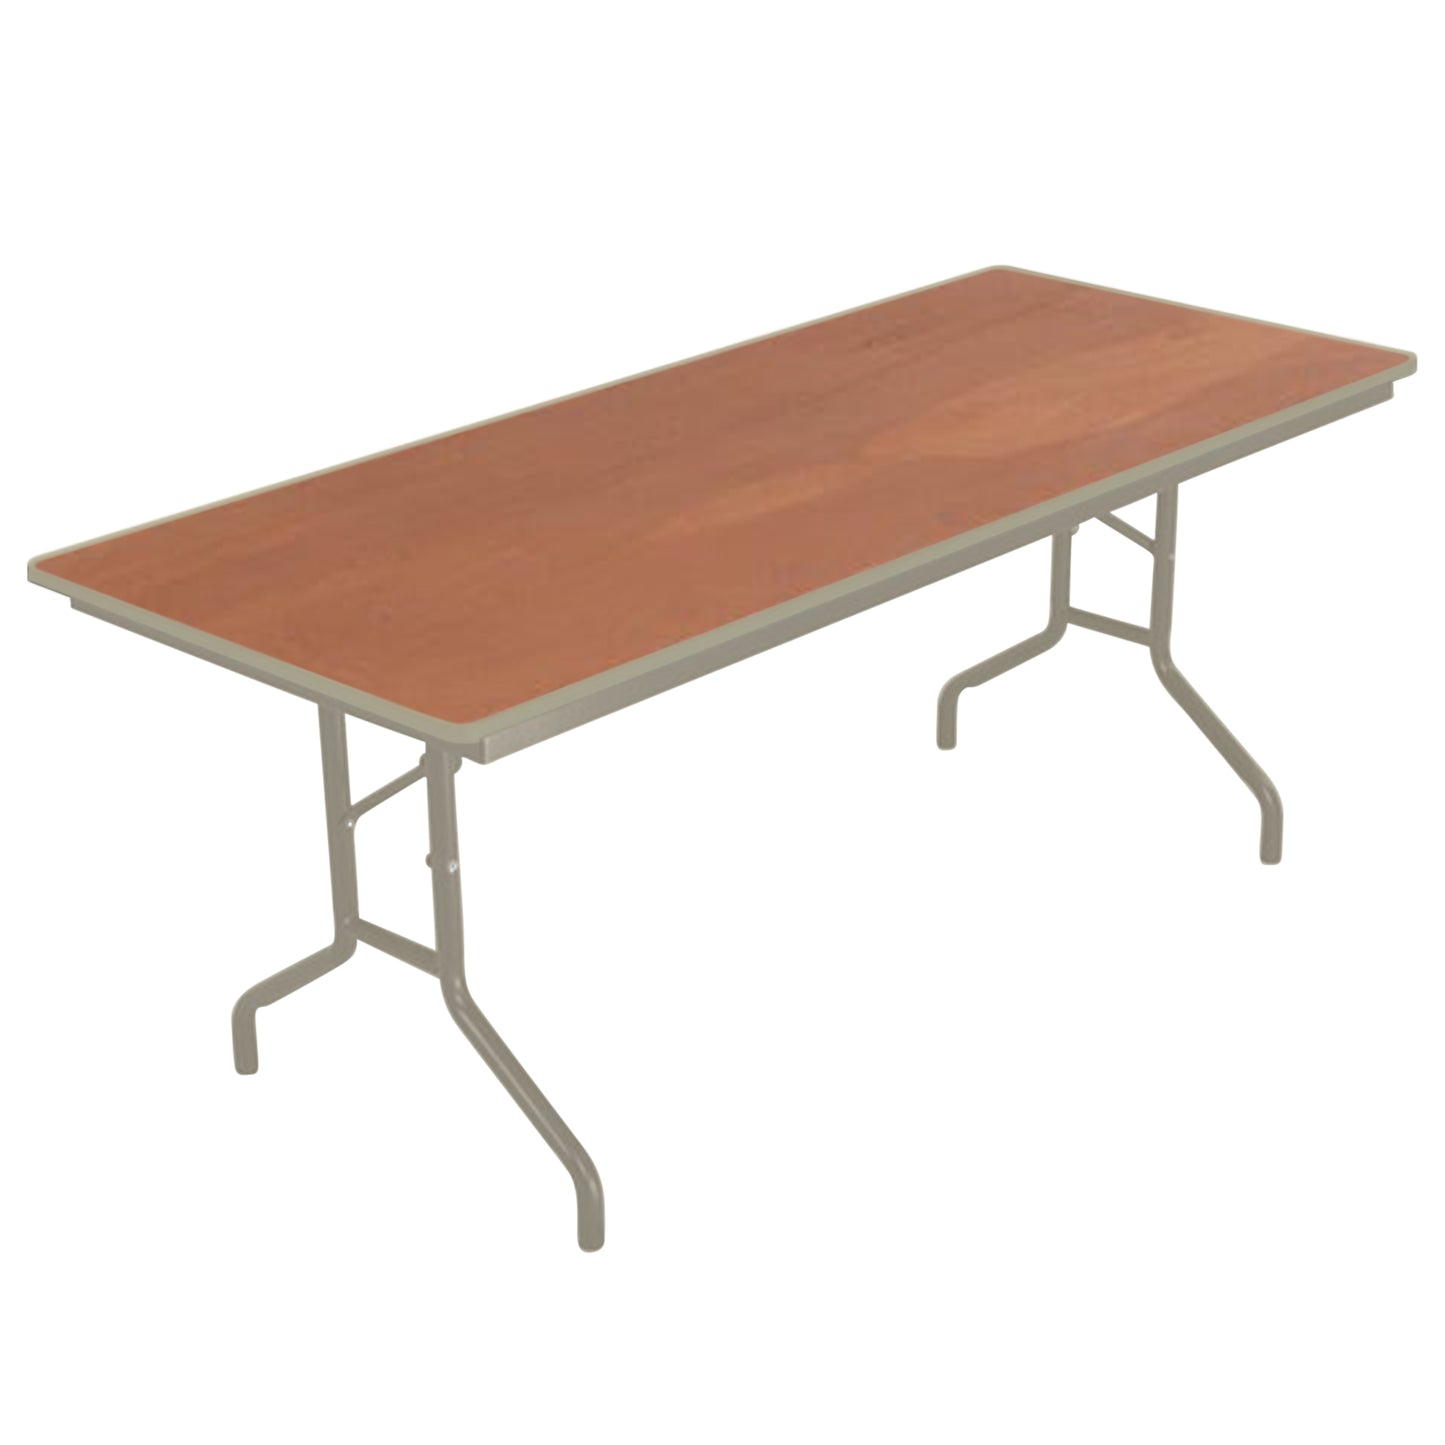 AmTab Folding Table - Plywood Stained and Sealed - Vinyl T-Molding Edge - 18"W x 96"L x 29"H  (AmTab AMT-188PM)